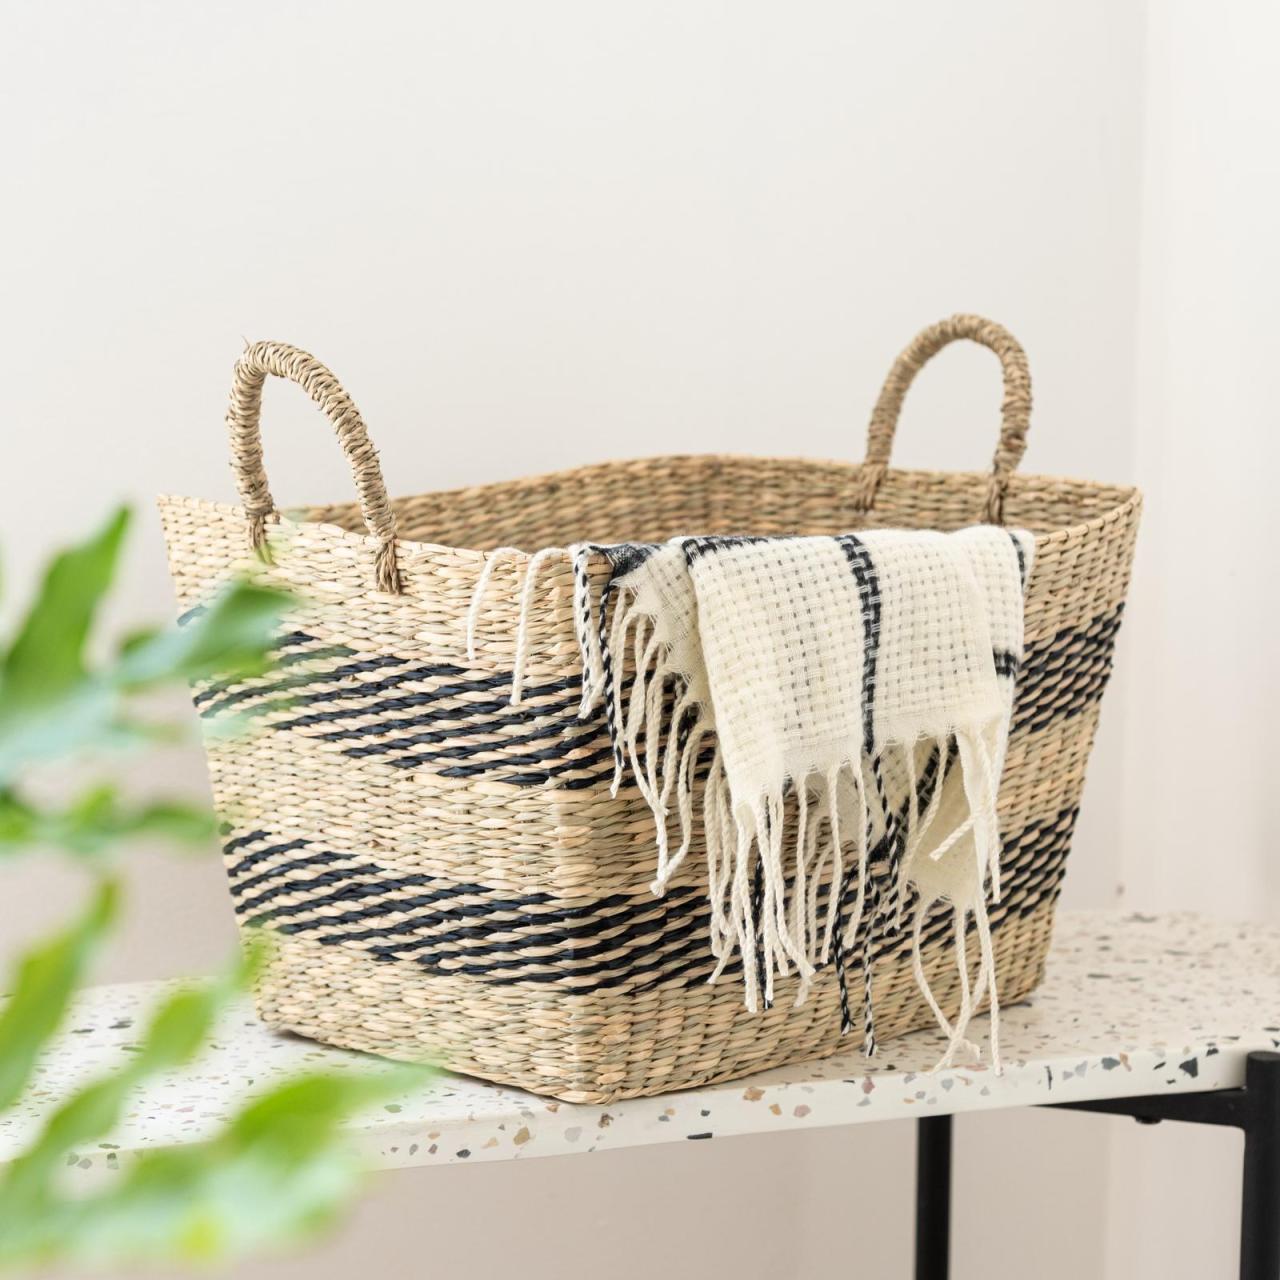 Hanging Plants Indoor | Wall Basket Bunnings: Elevate Your Home Decor with Style and Functionality